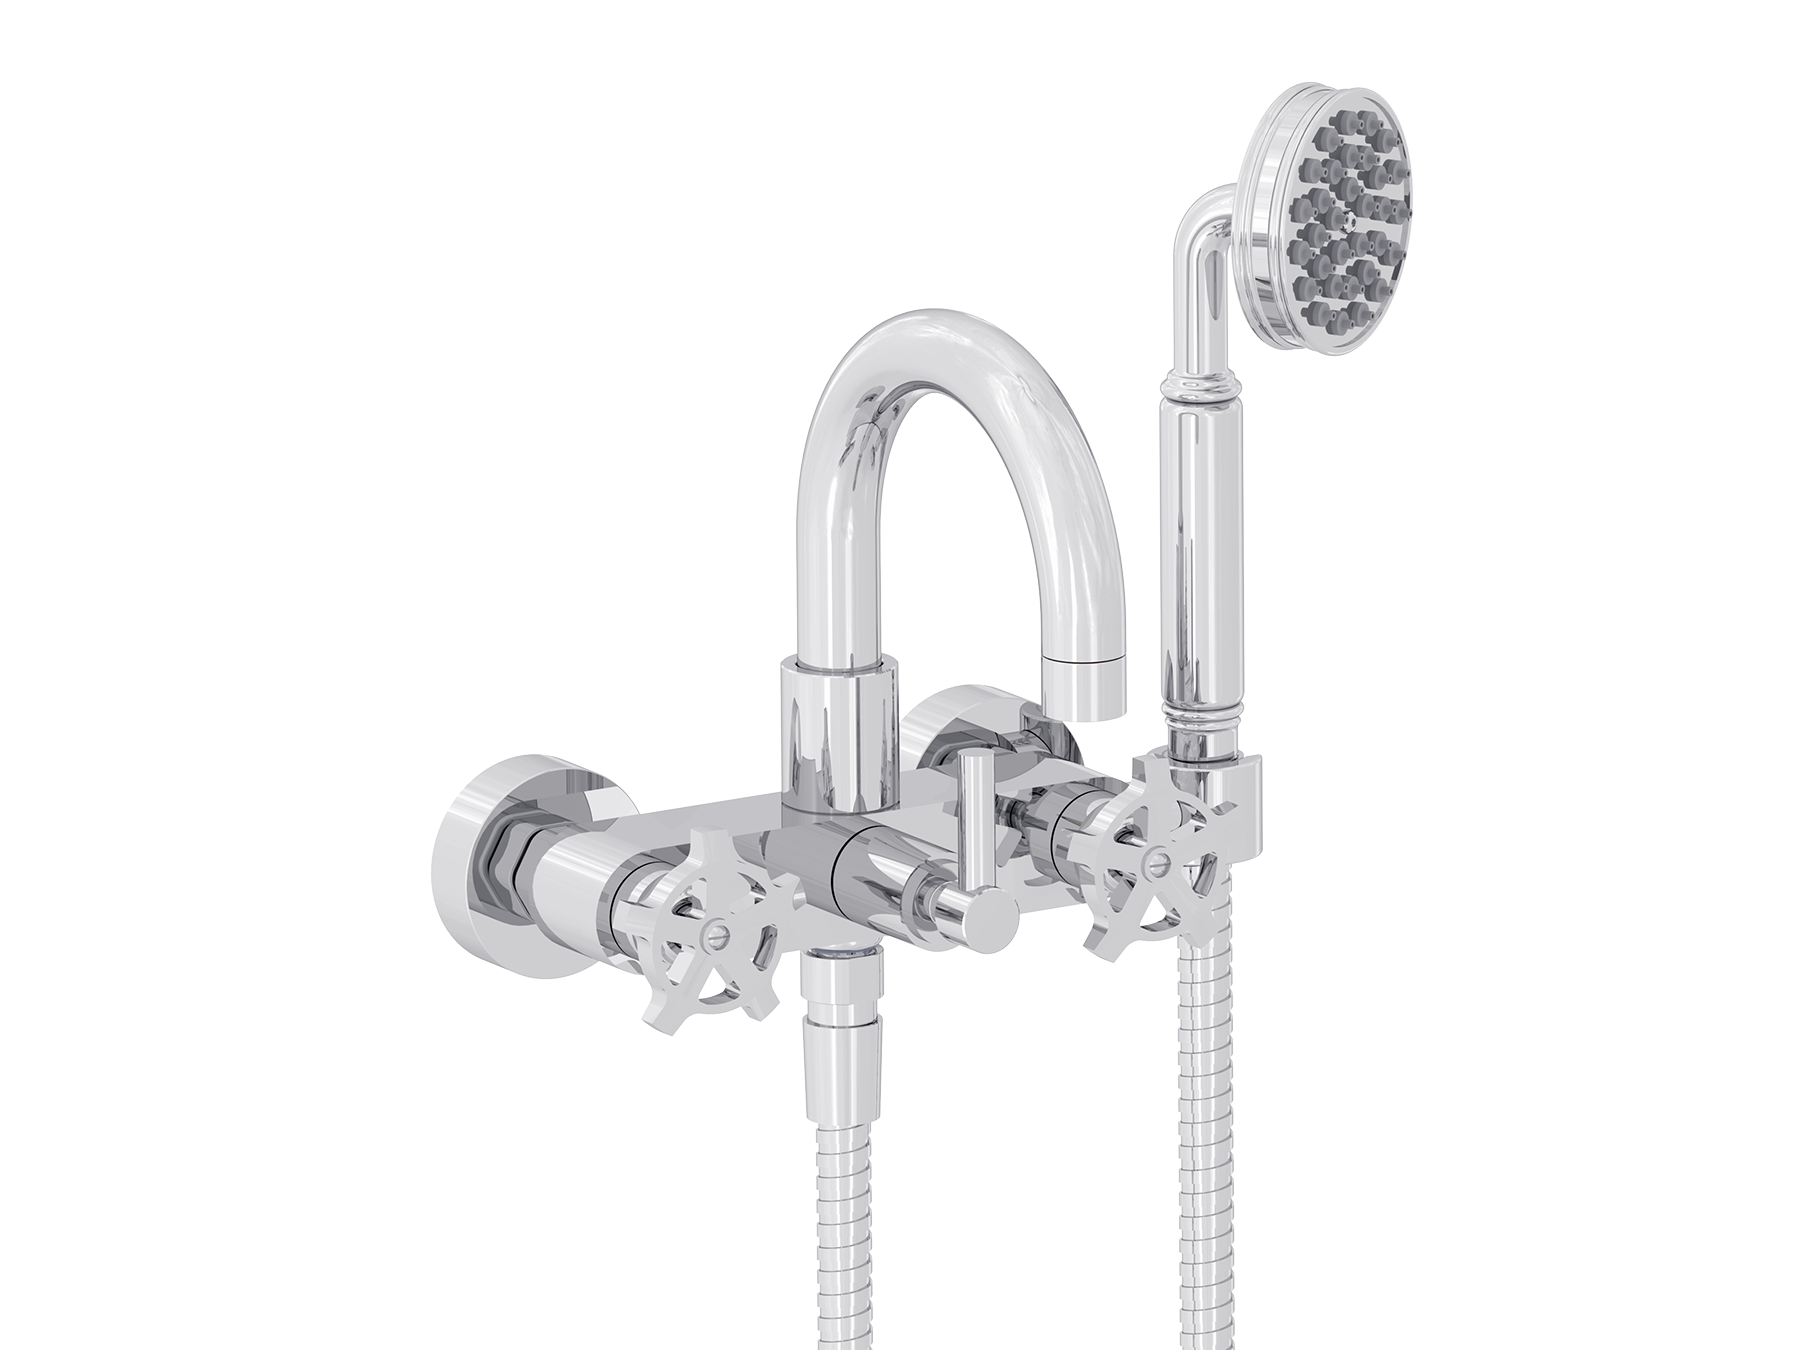 Wall-mounted bath mixer with flexible, handshower and holder